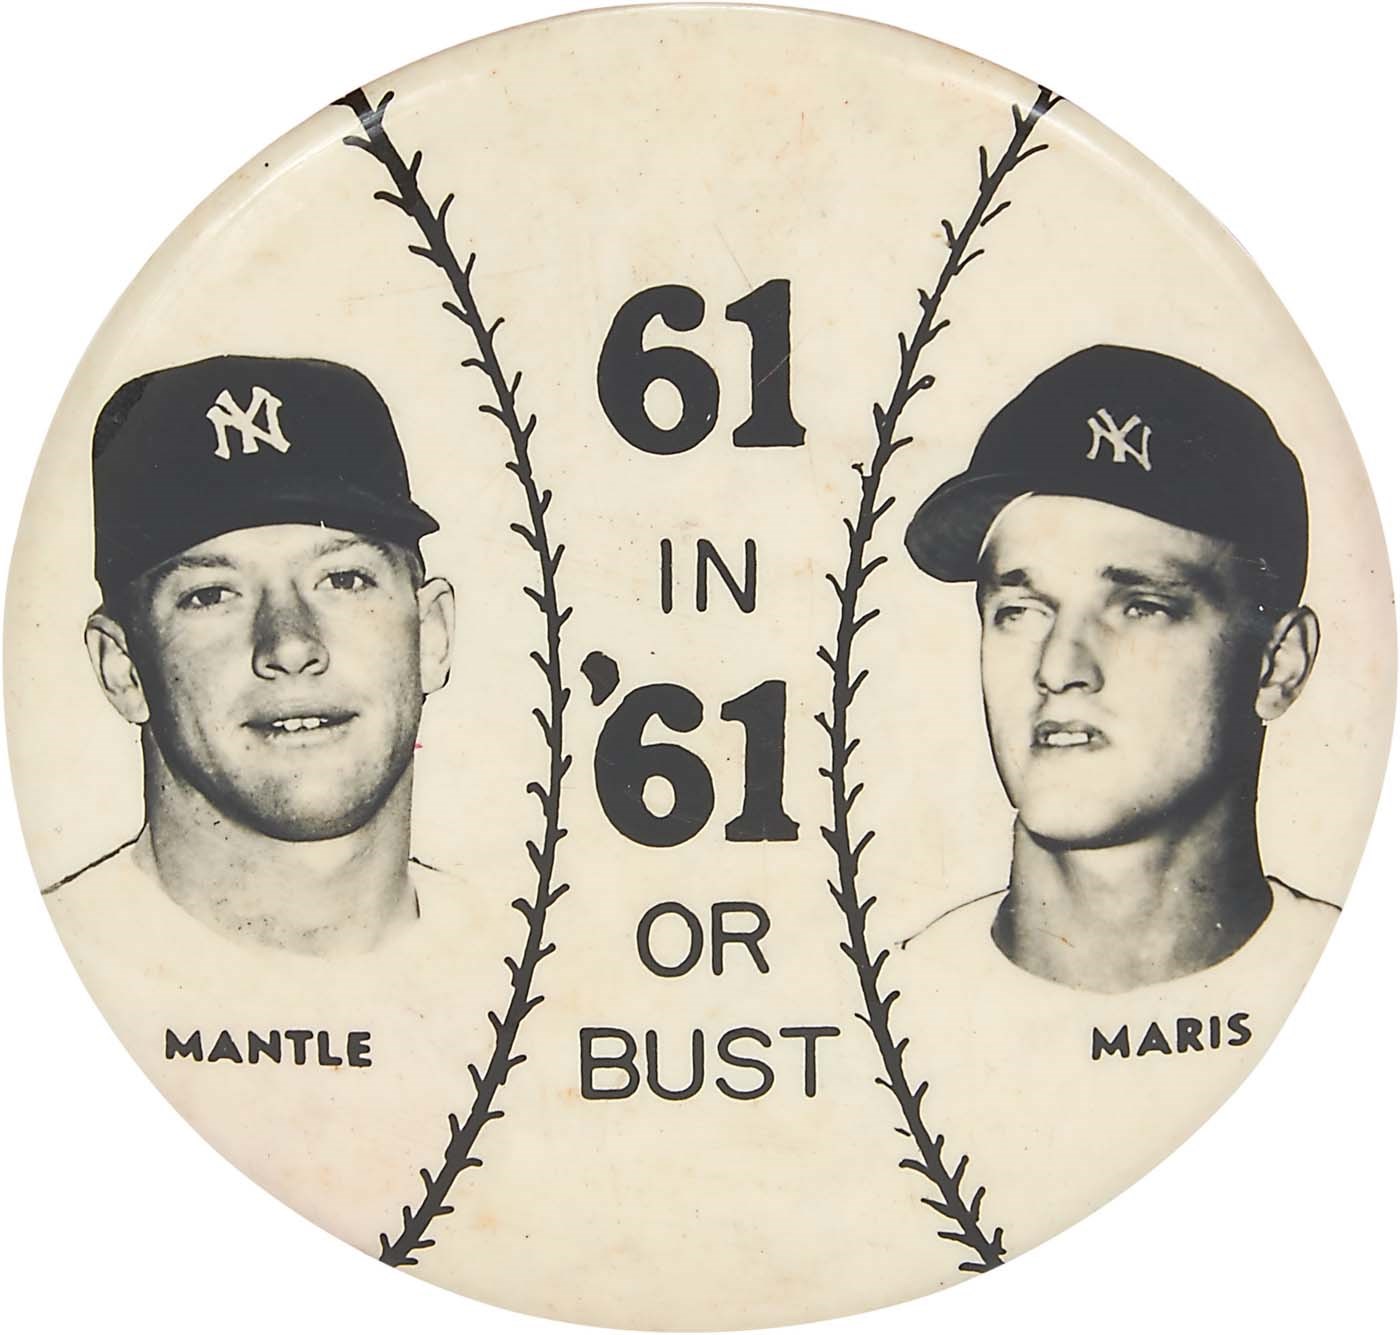 Mantle and Maris - "61 in '61 or Bust" Mantle & Maris Jumbo Pin